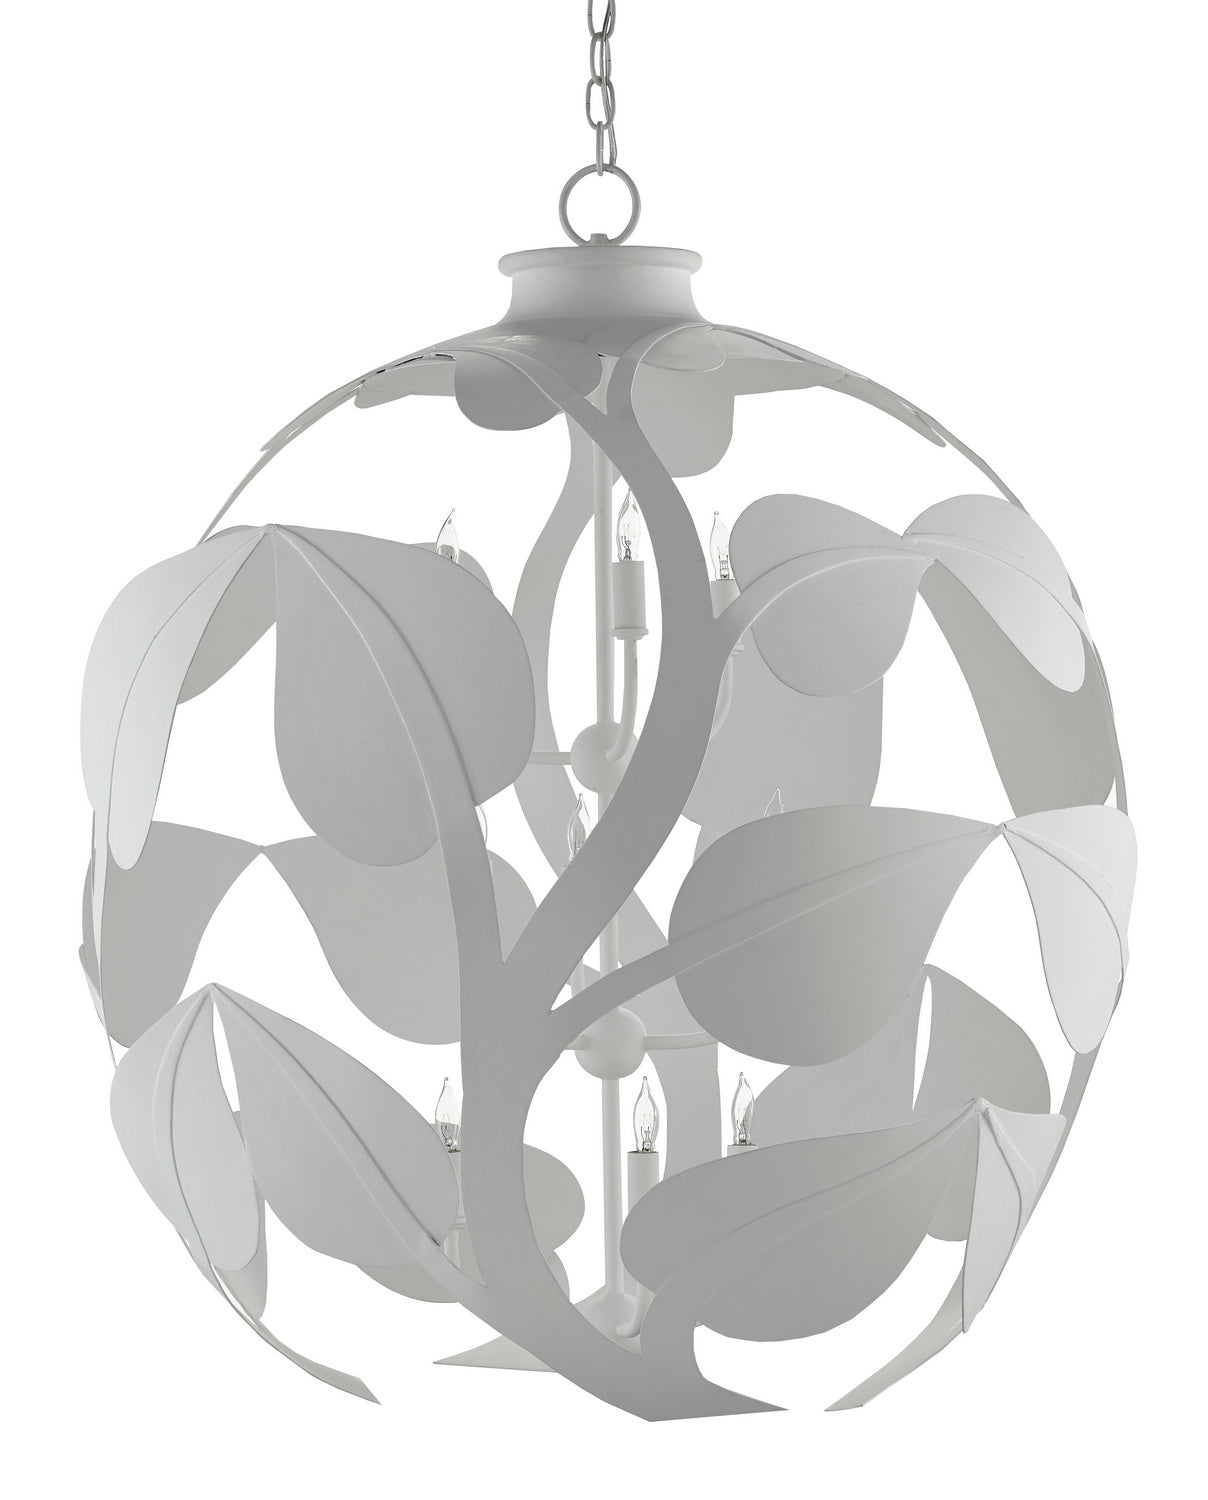 Nine Light Chandelier from the Plumeria collection in Gesso White finish